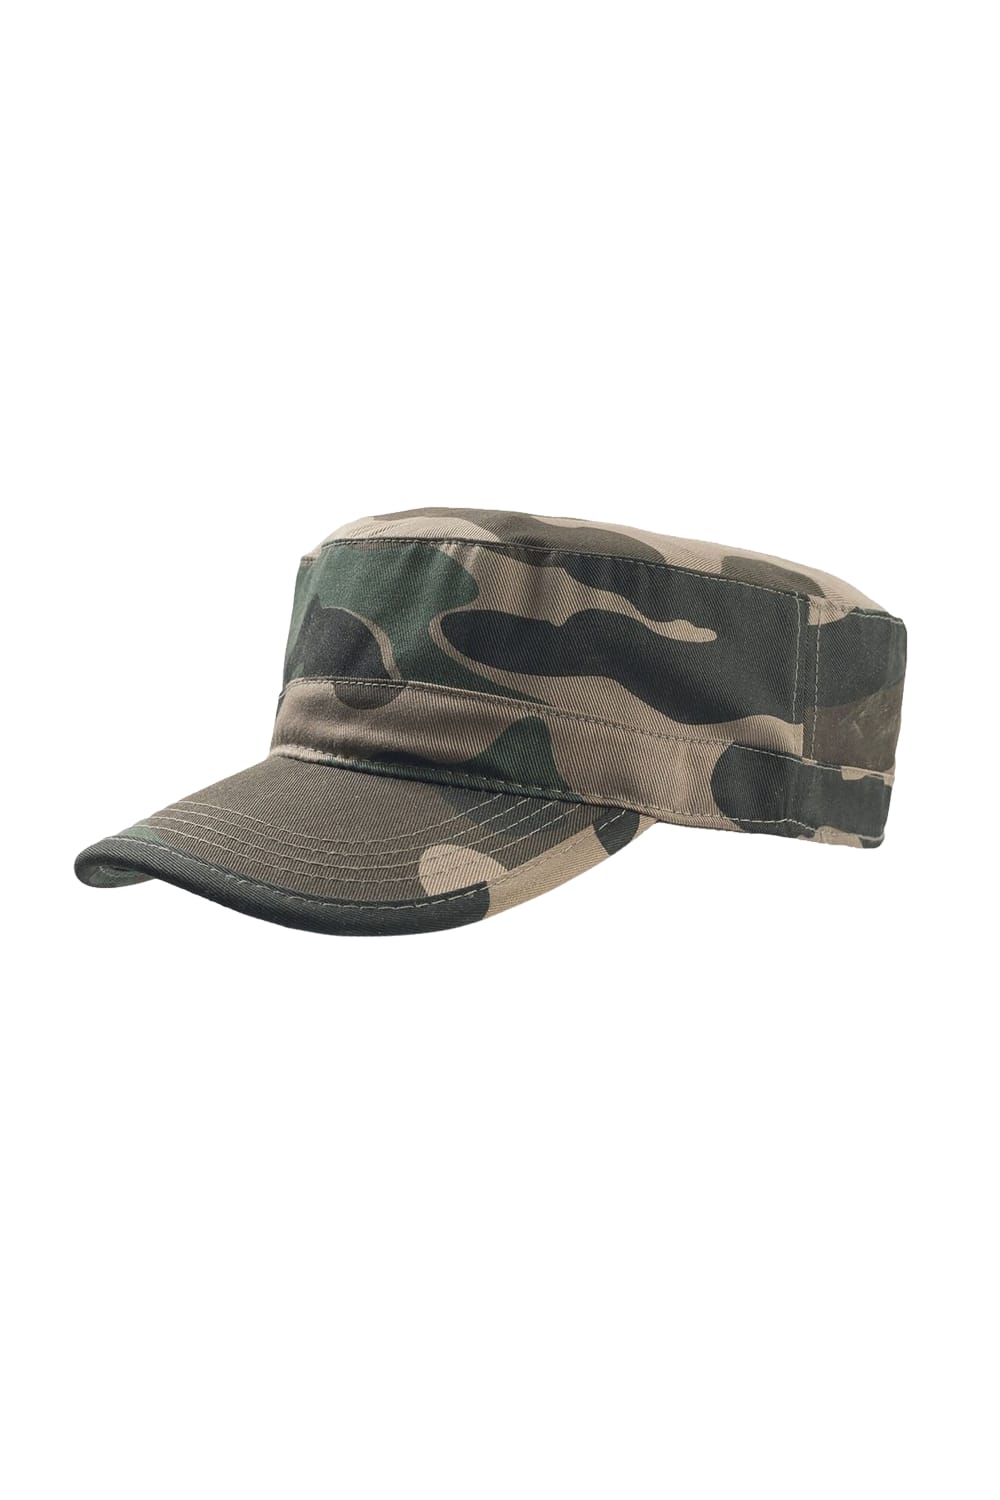 Atlantis Tank Brushed Cotton Military Cap (Pack of 2) (Camouflage)